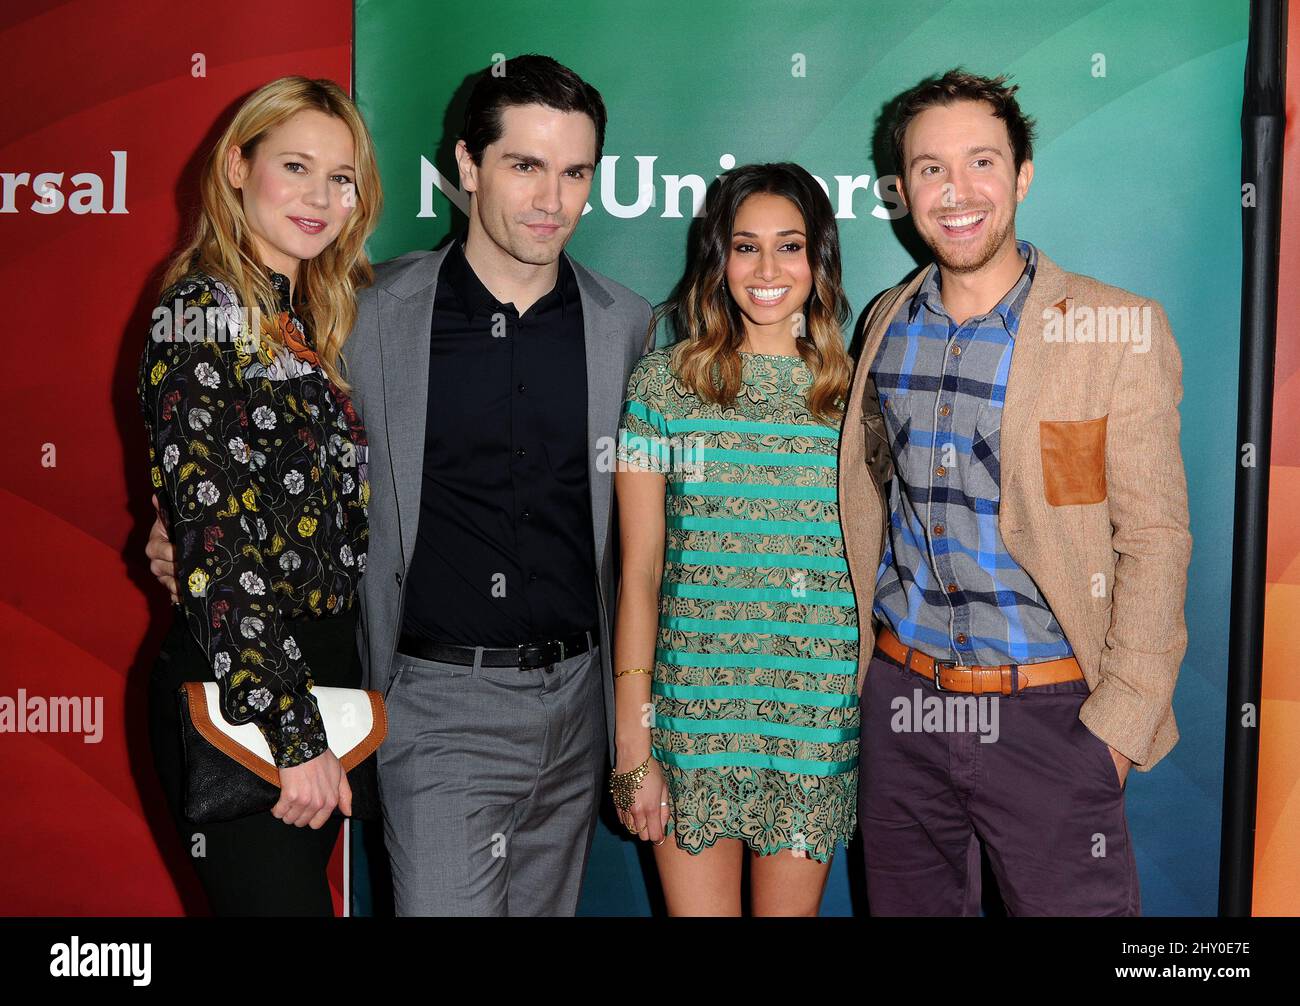 Kristen Hager, Sam Witwer, Meaghan Rath and Sam Huntington attending day 2 of the NBC Universal TCA Press Tour in Los Angeles, California. Stock Photo